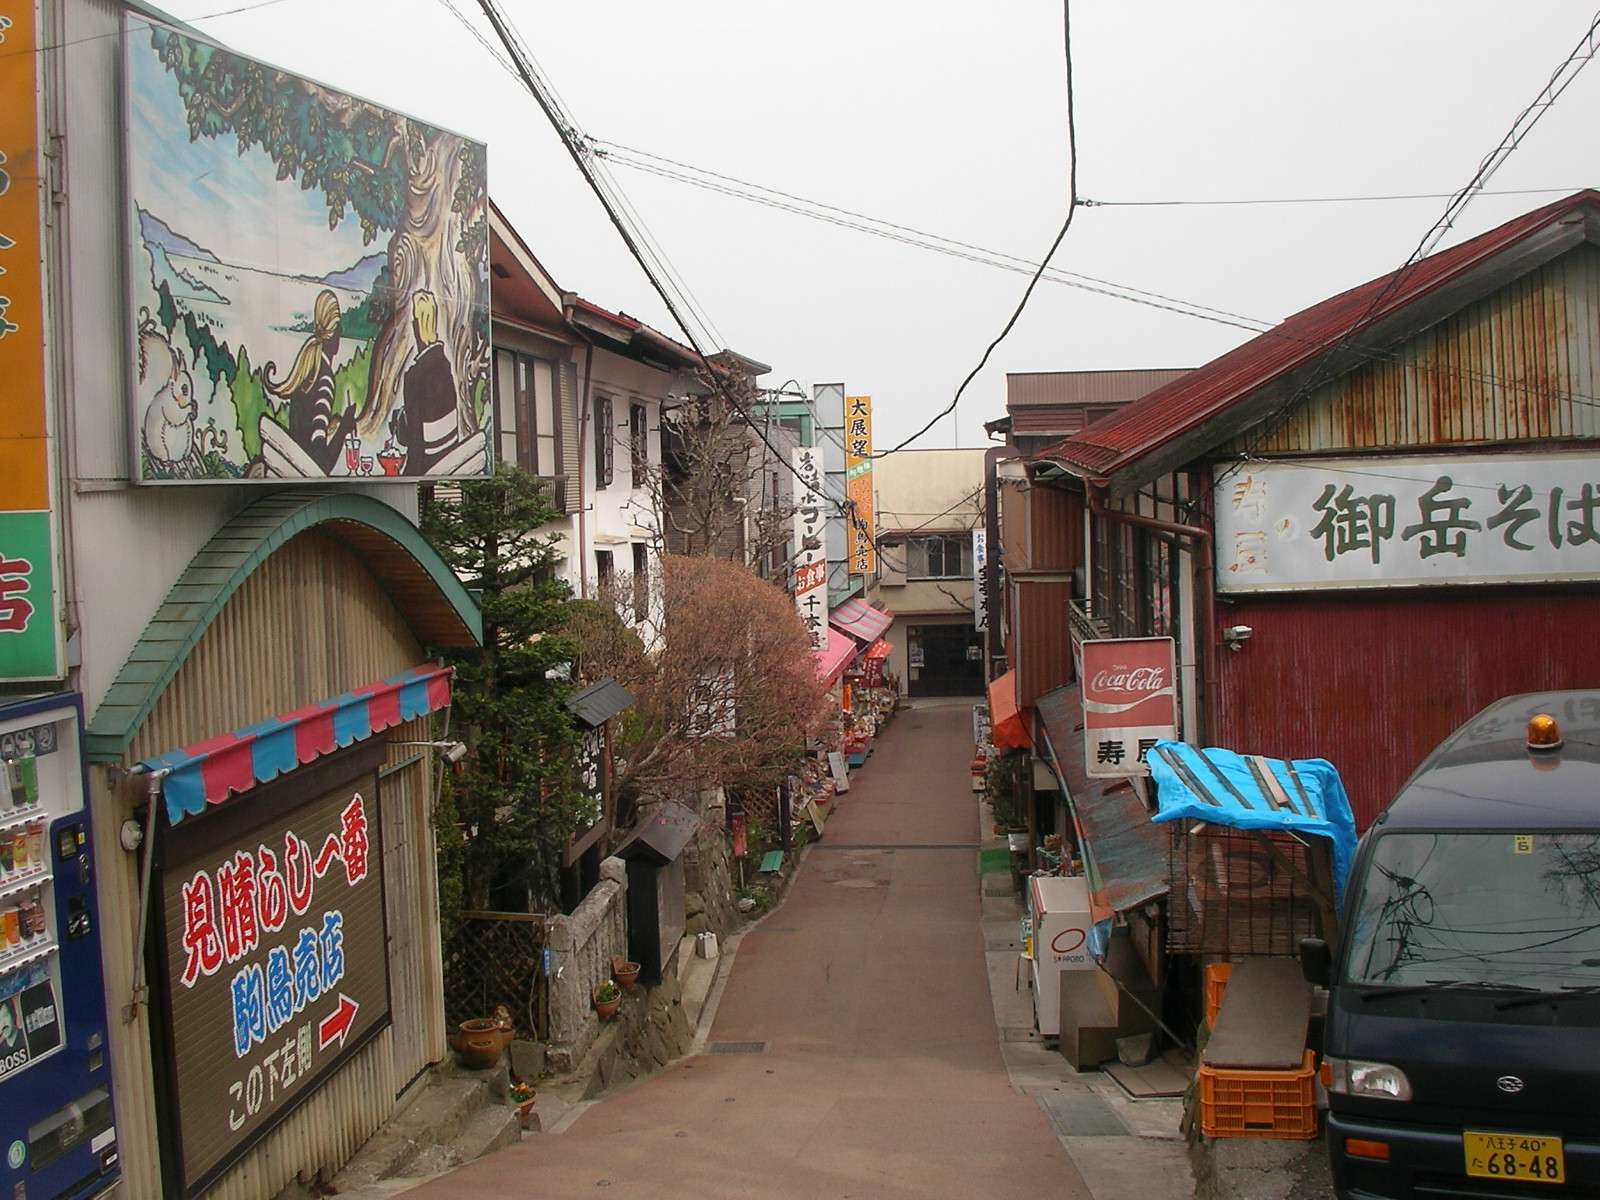 an alley with a car and various business signs